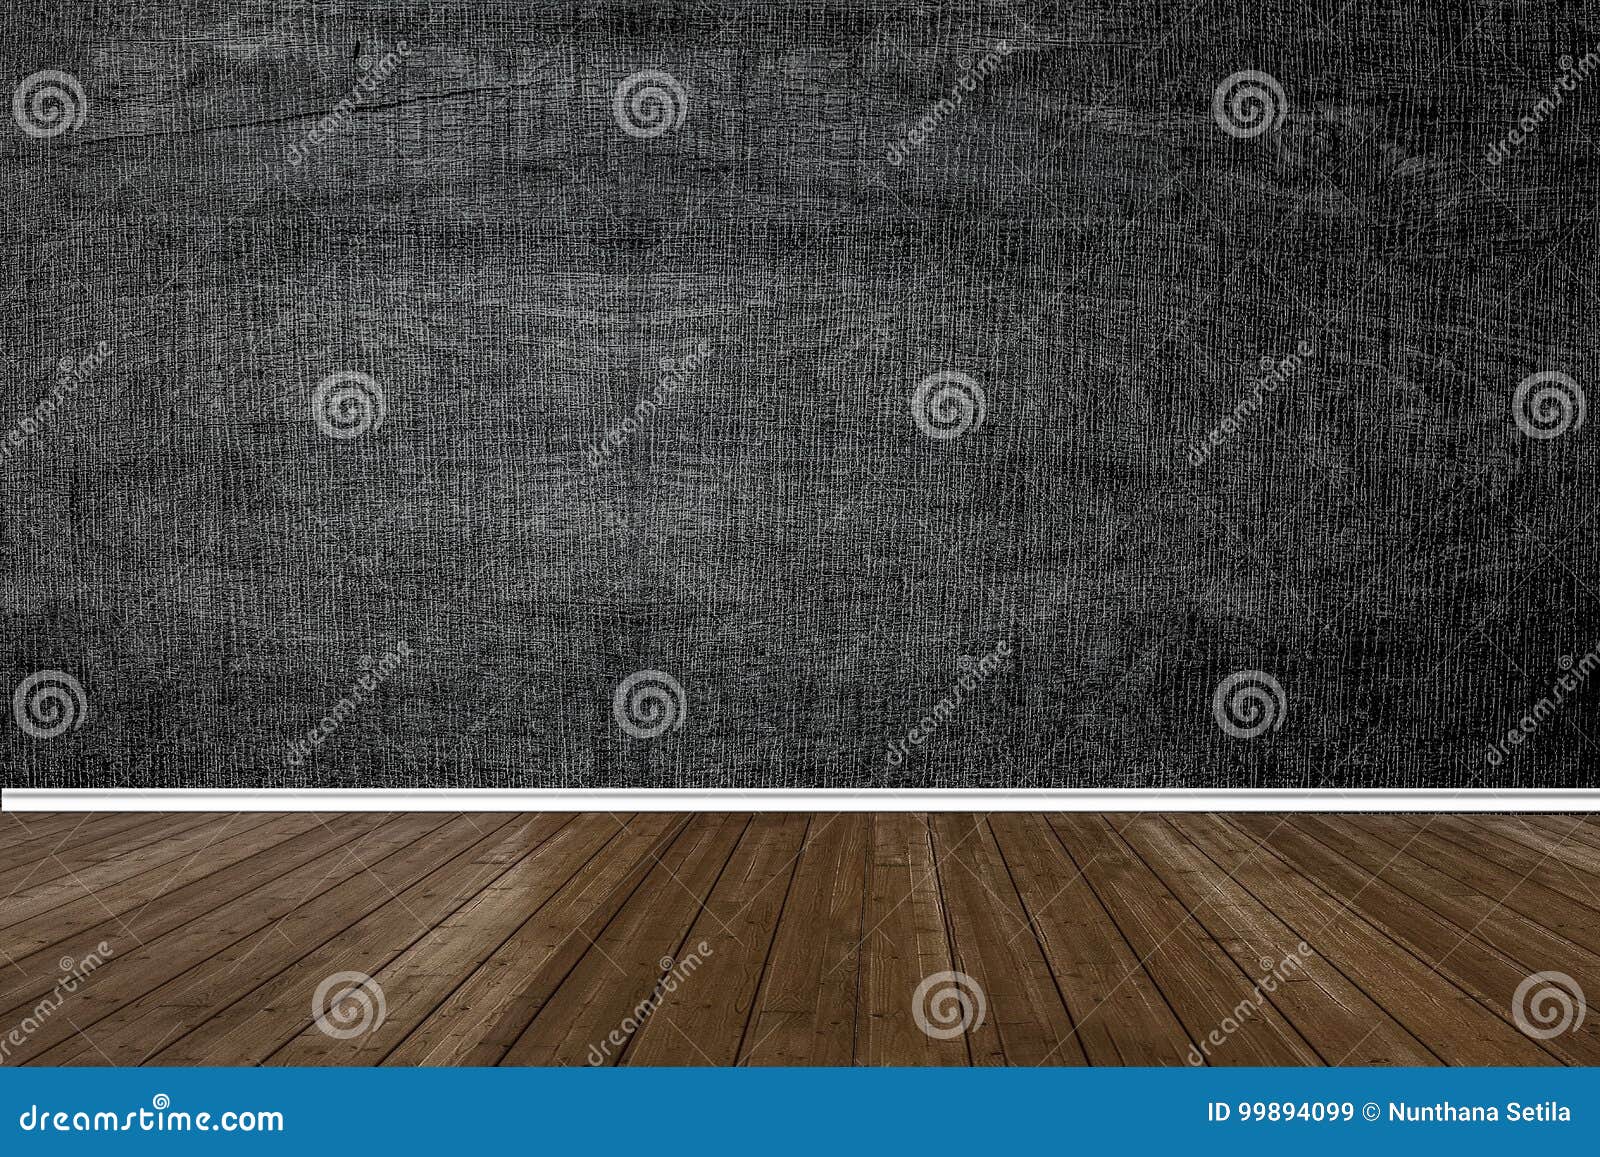 abstract wood floor texture and chalk rubbed out on blackboard